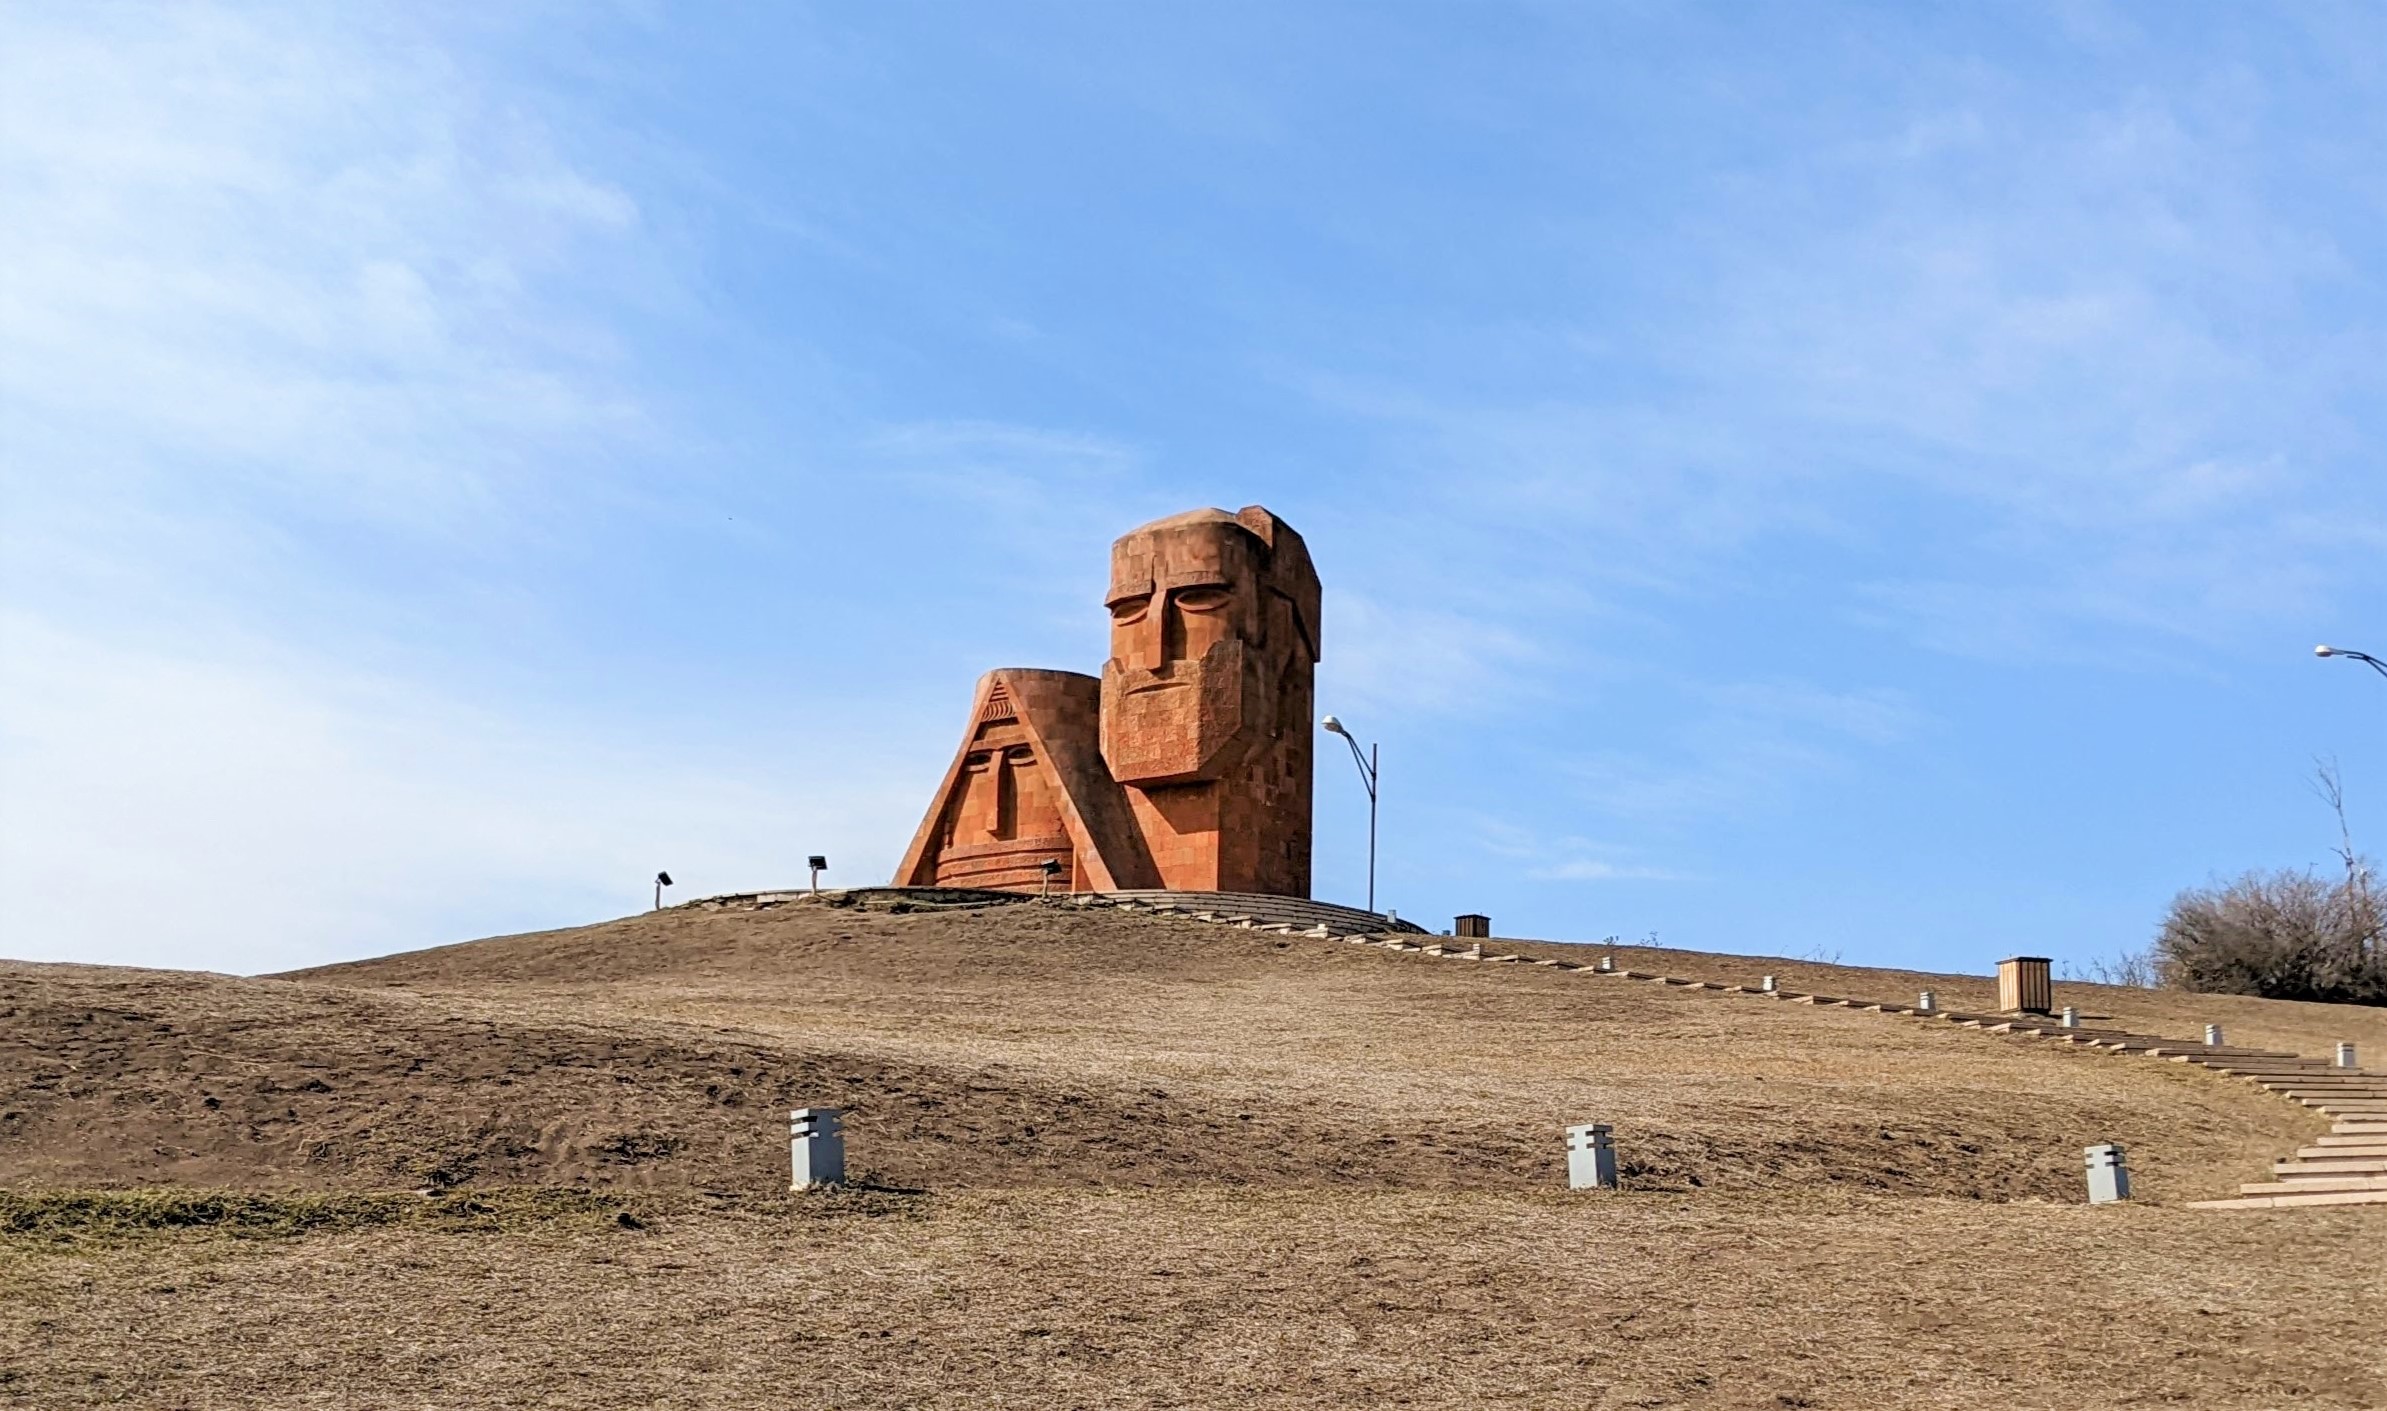 Armenian public continues to reject Azerbaijani claims over Karabakh in new poll